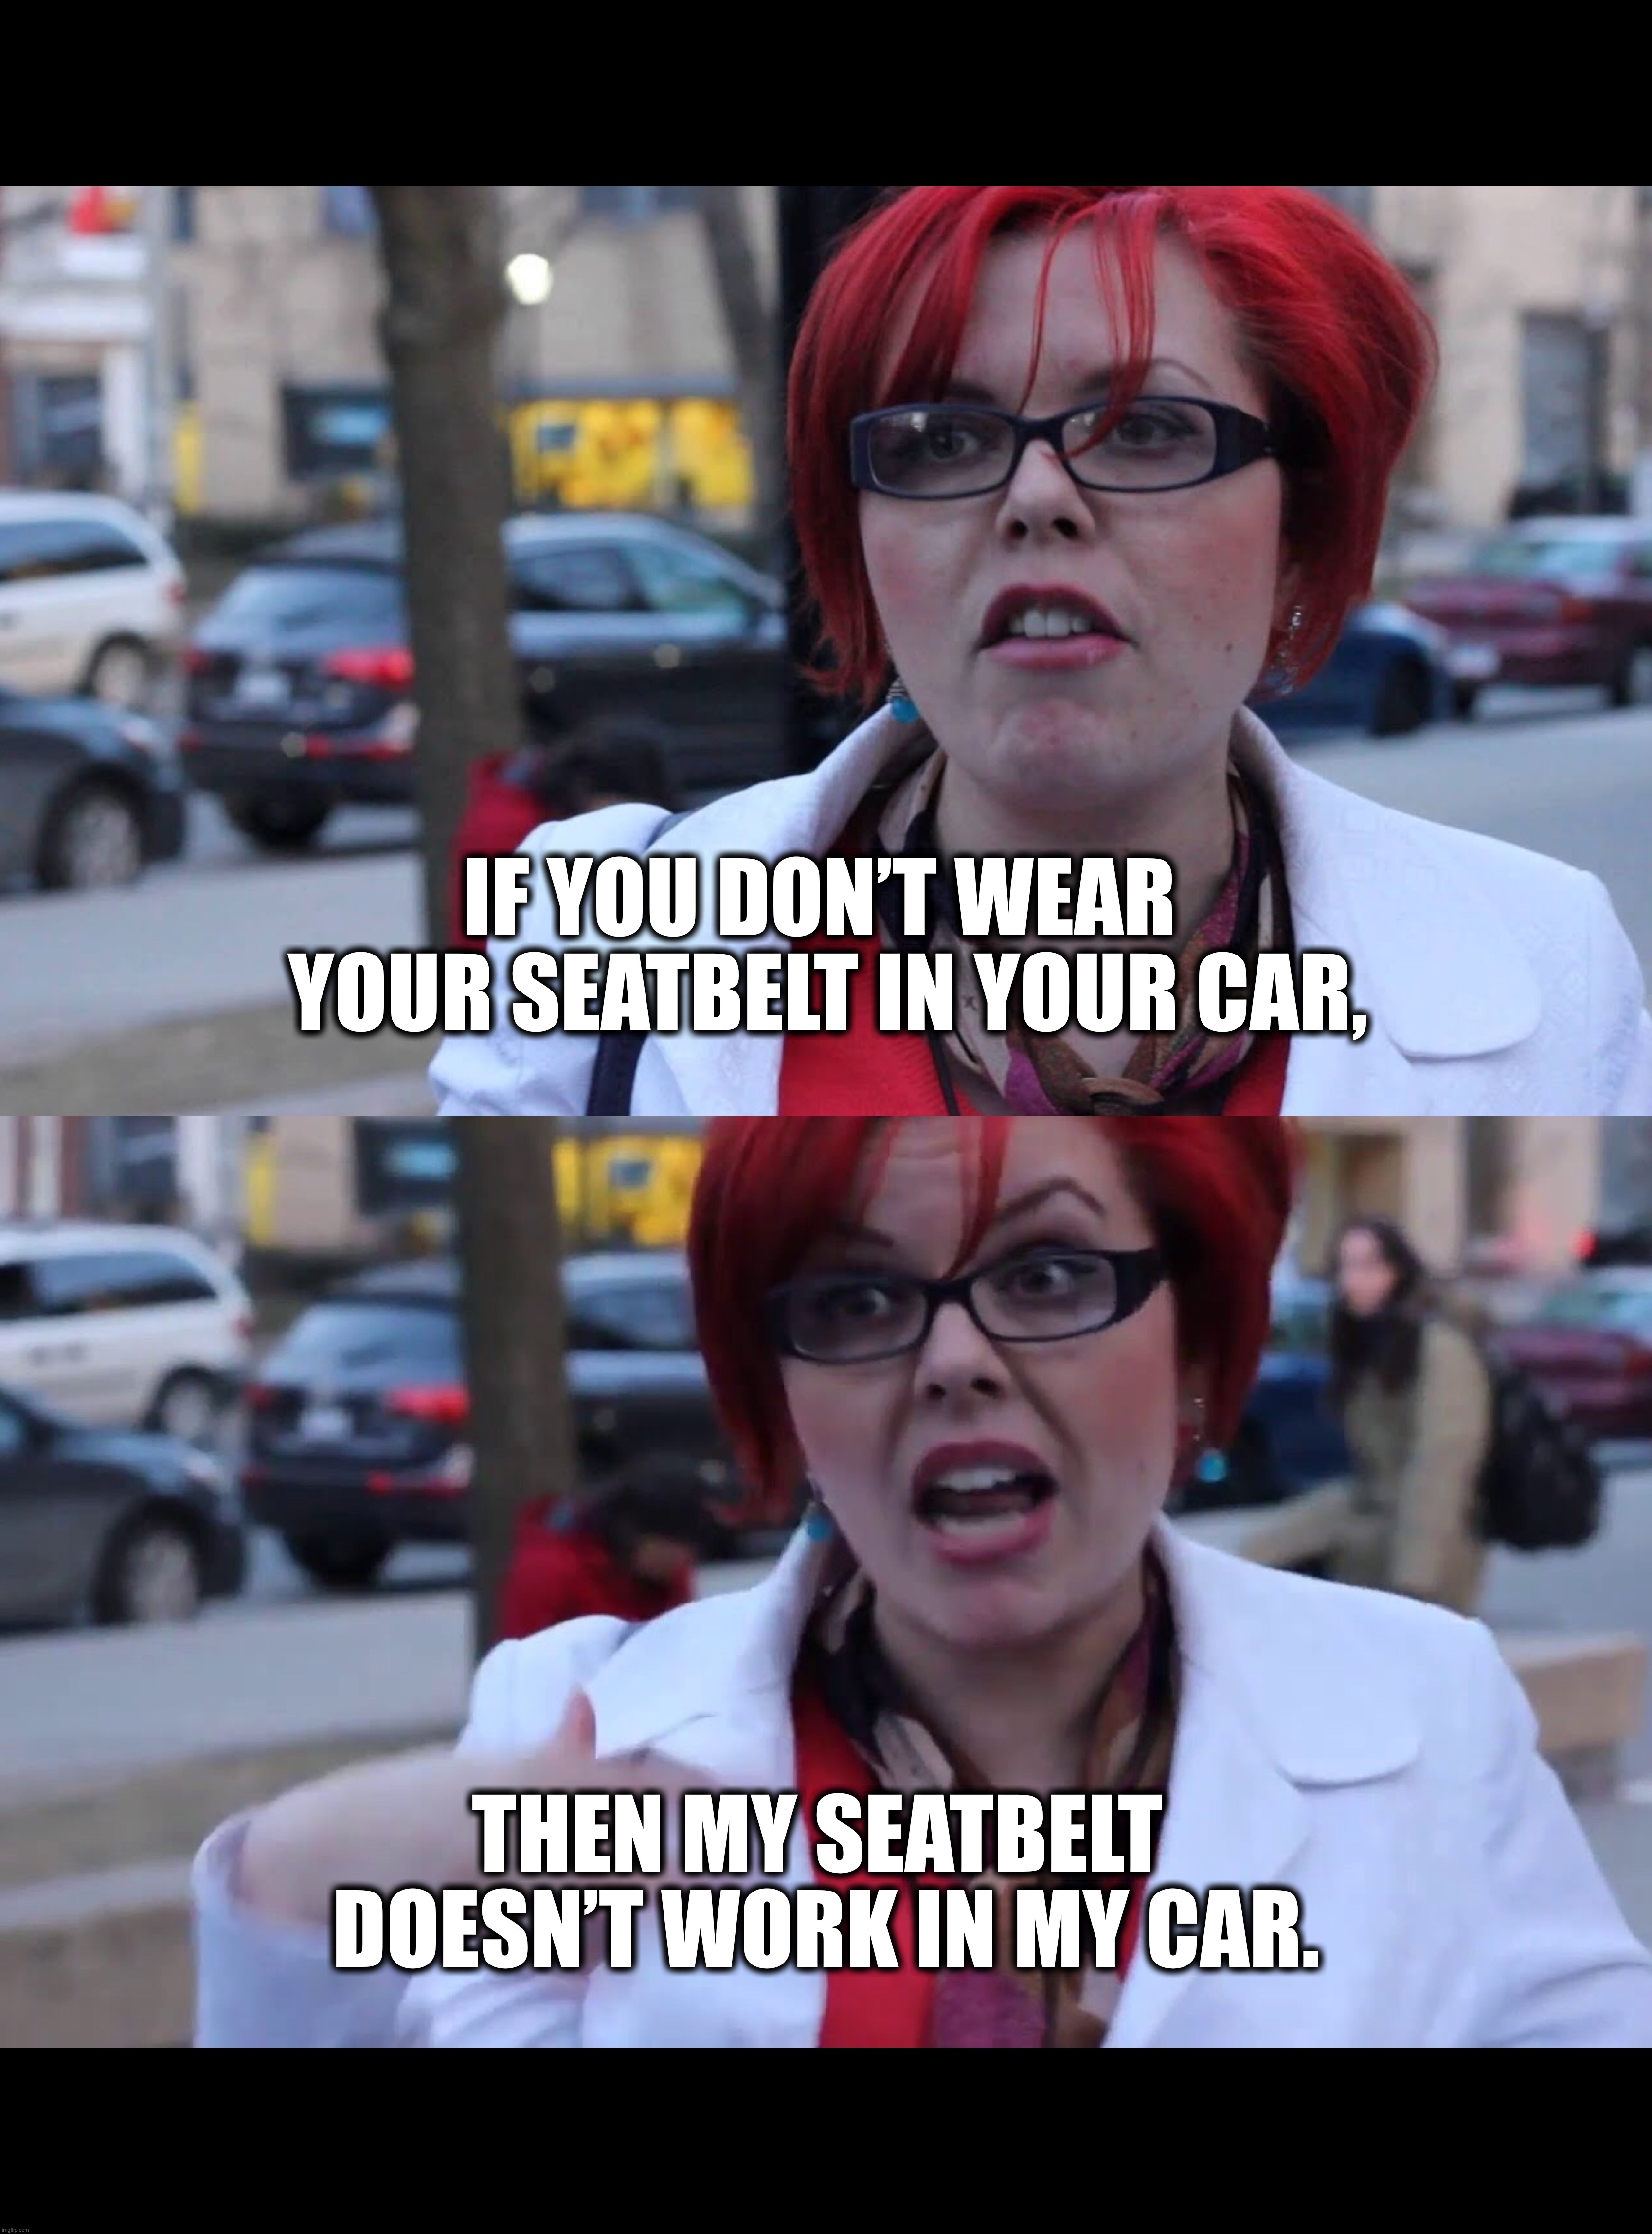 IF YOU DON’T WEAR 
YOUR SEATBELT IN YOUR CAR, THEN MY SEATBELT 
DOESN’T WORK IN MY CAR. | image tagged in covid-19,vaccines,vaccination,vaccinations,china virus,face mask | made w/ Imgflip meme maker